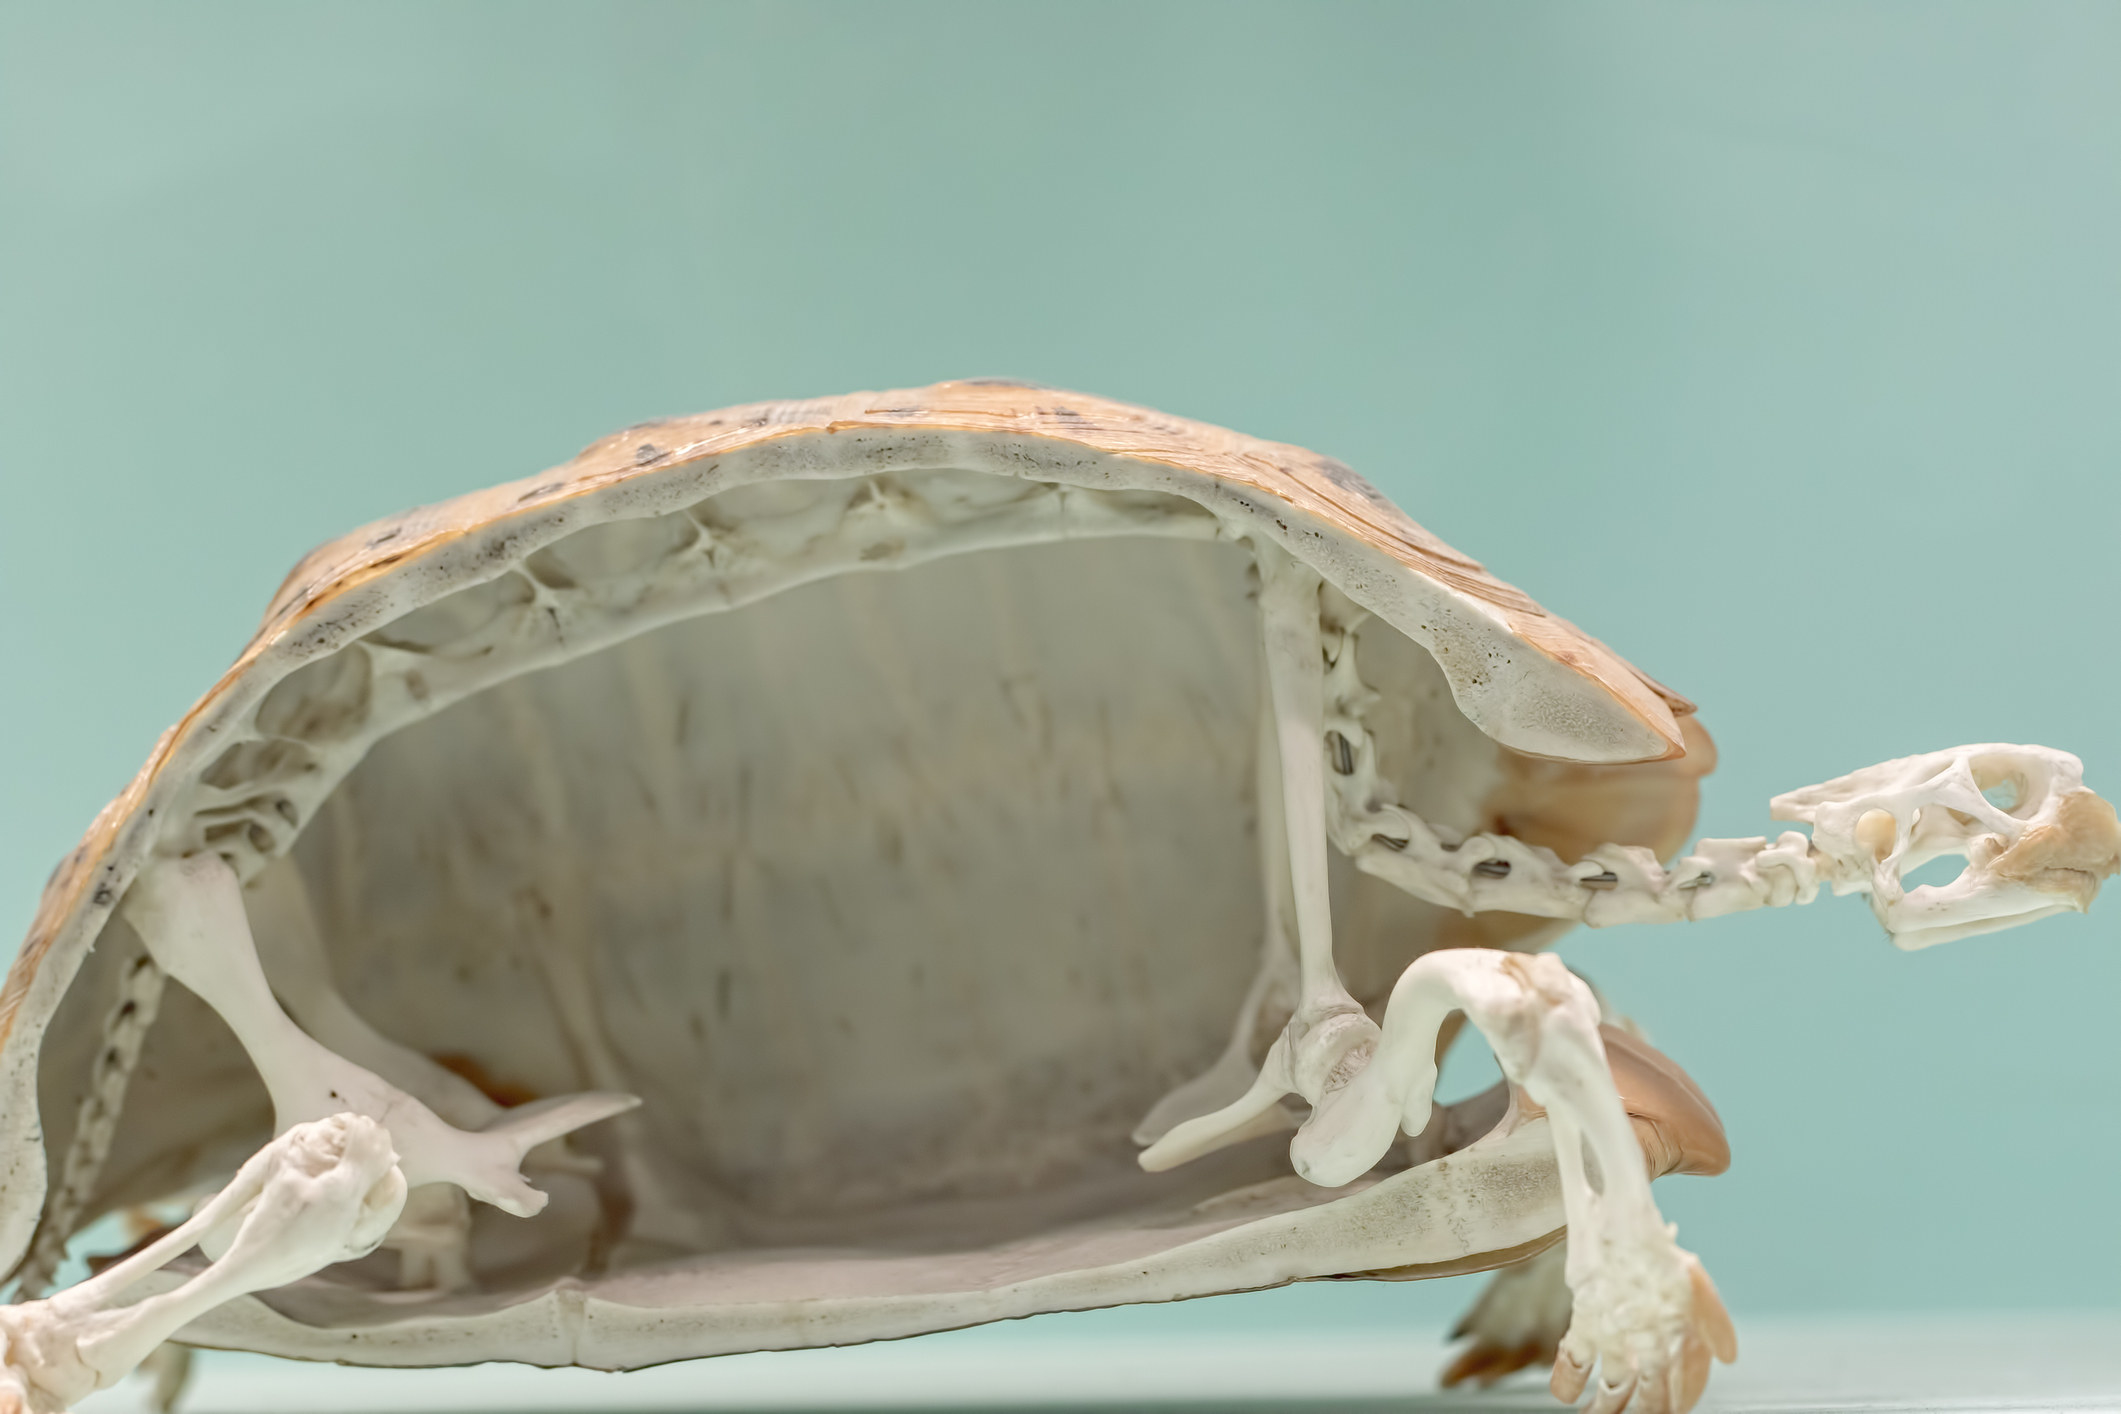 Model of a turtle